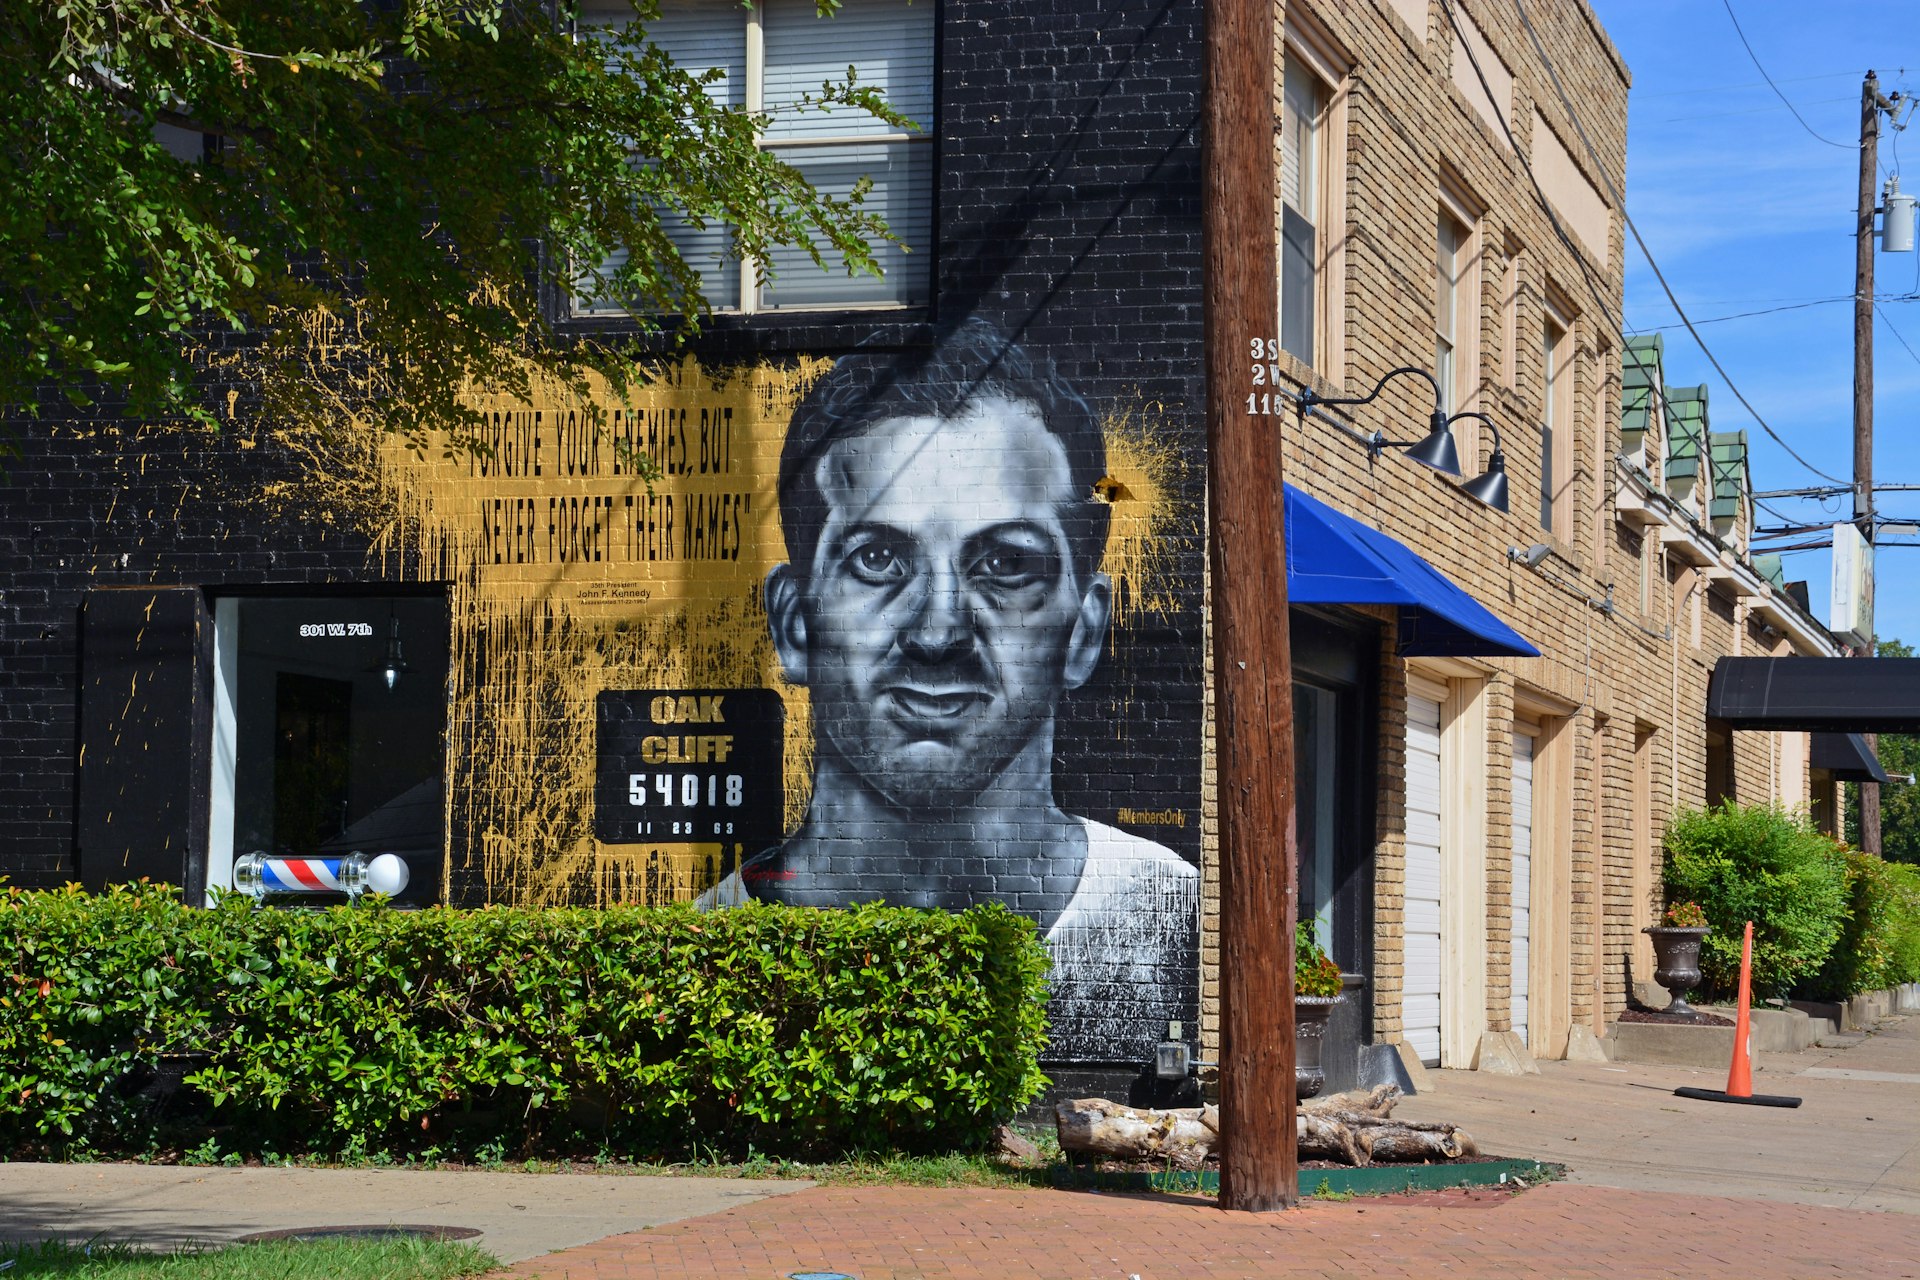 A mural is painted in the Oak Cliff, Bishop Arts District to recall Lee Harvey Oswald and his assassination of John F Kennedy.